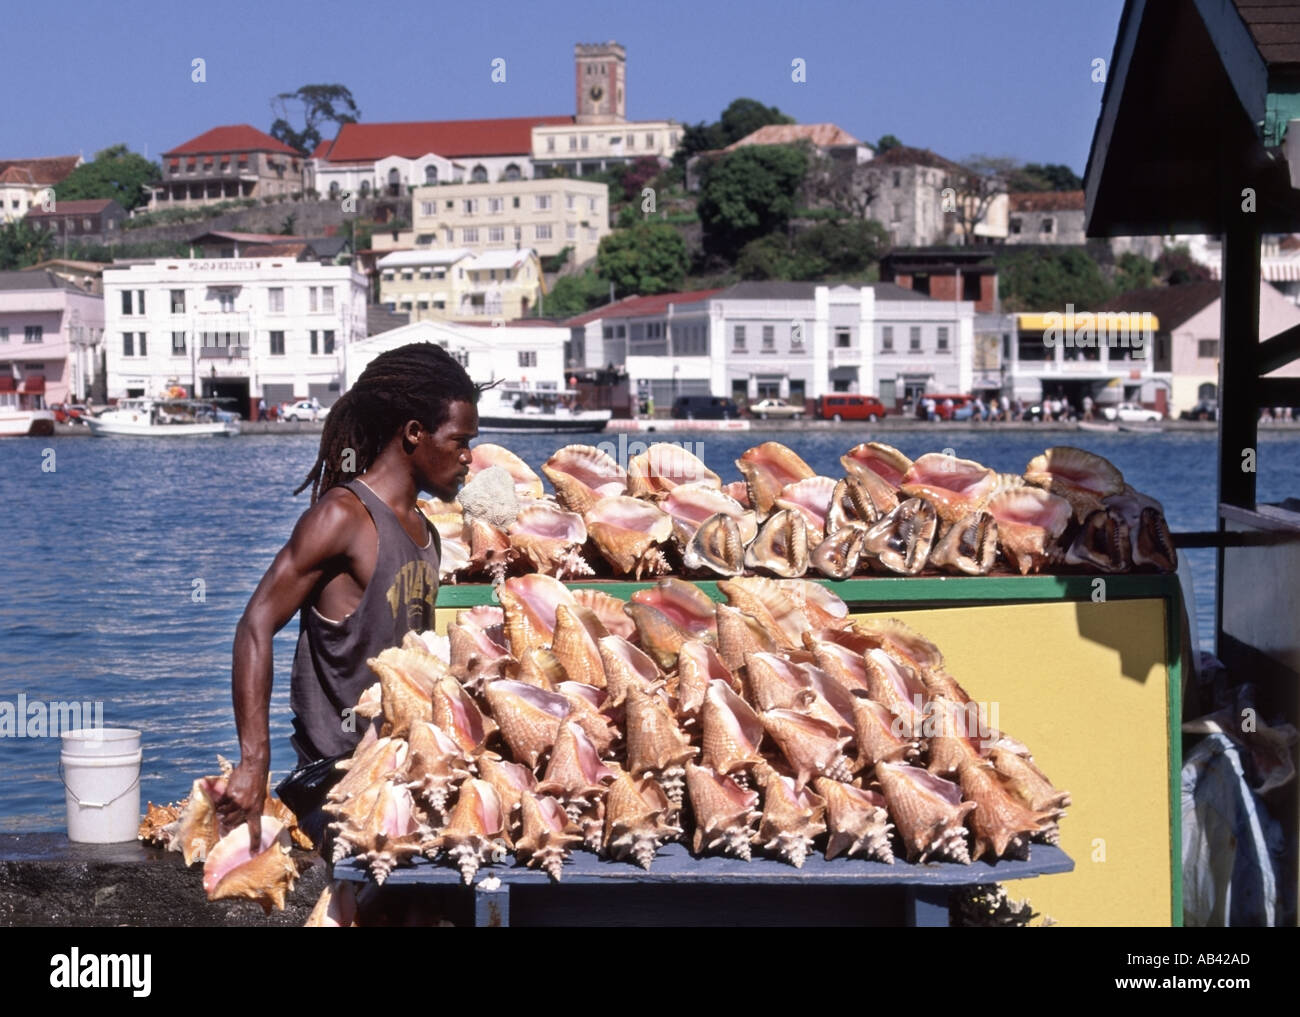 Grenada Caribbean St Georges harbour in the Caribbean Sea waterside trader market stall selling conch shells to tourists from cruise ship liners Stock Photo